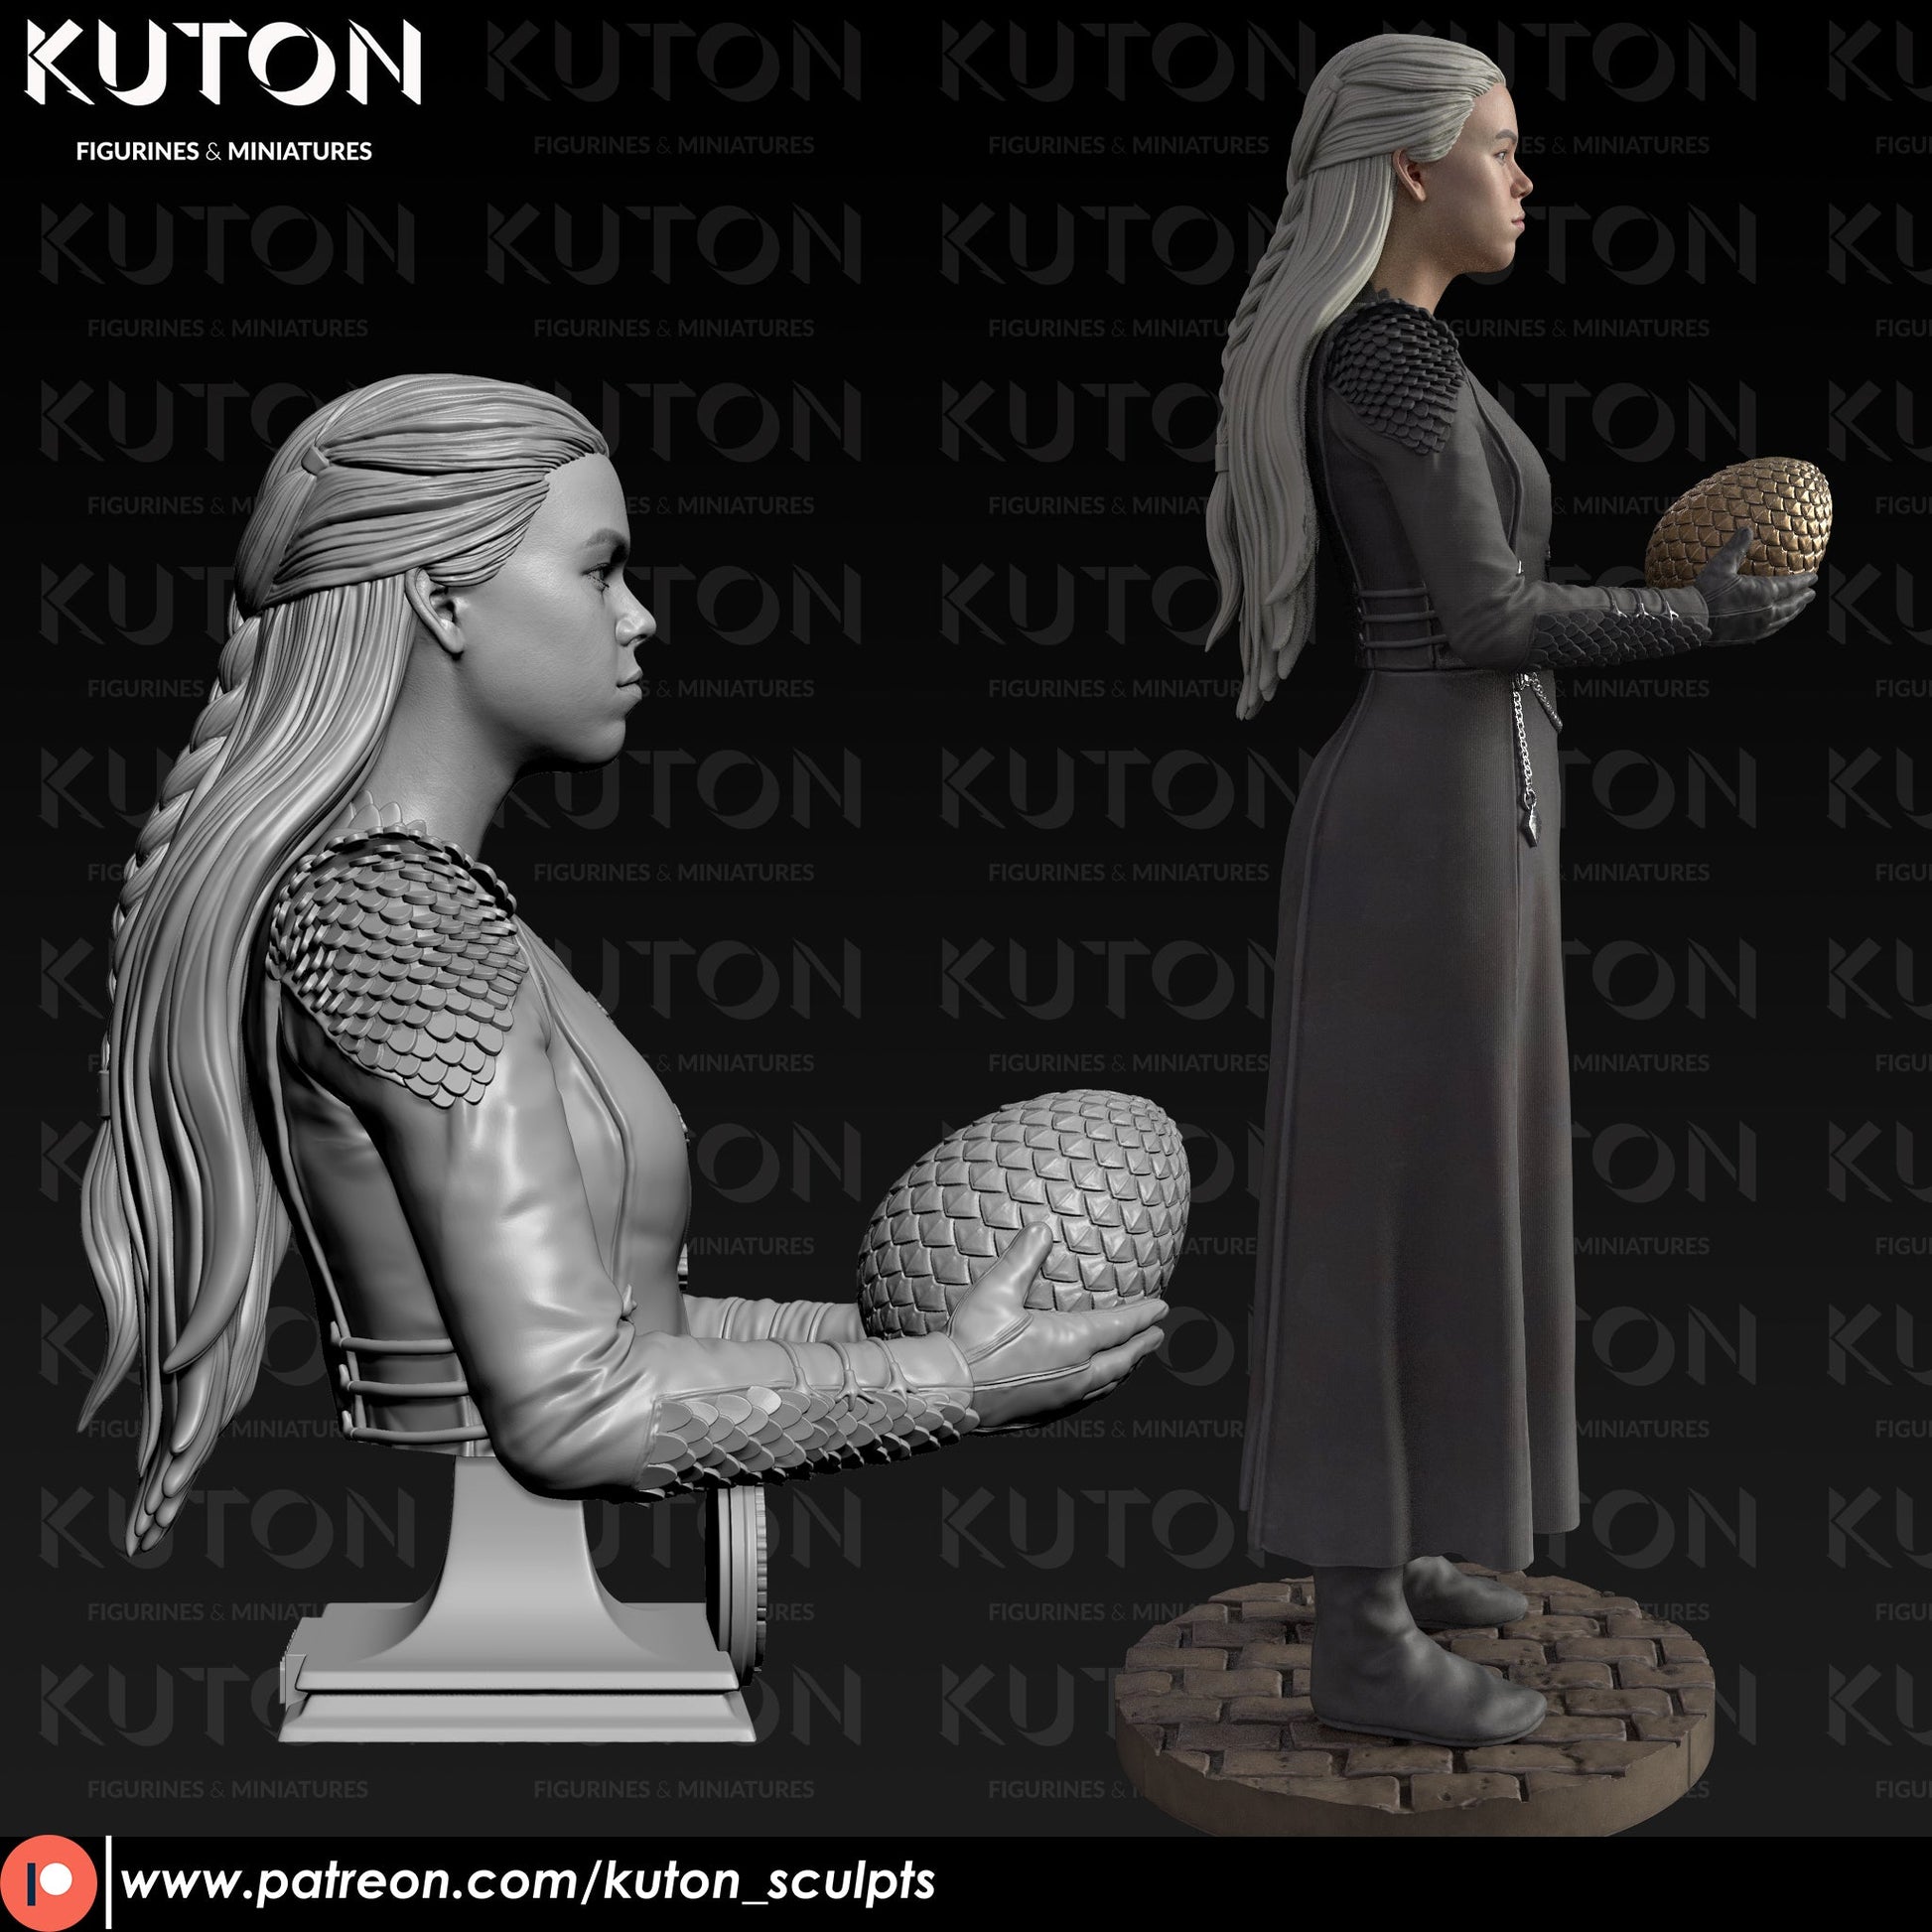 Rhaenyra BUST 3d printed Resin Figure Model Kit miniatures figurines collectibles and scale models UNPAINTED Fun Art by KUTON FIGURINES